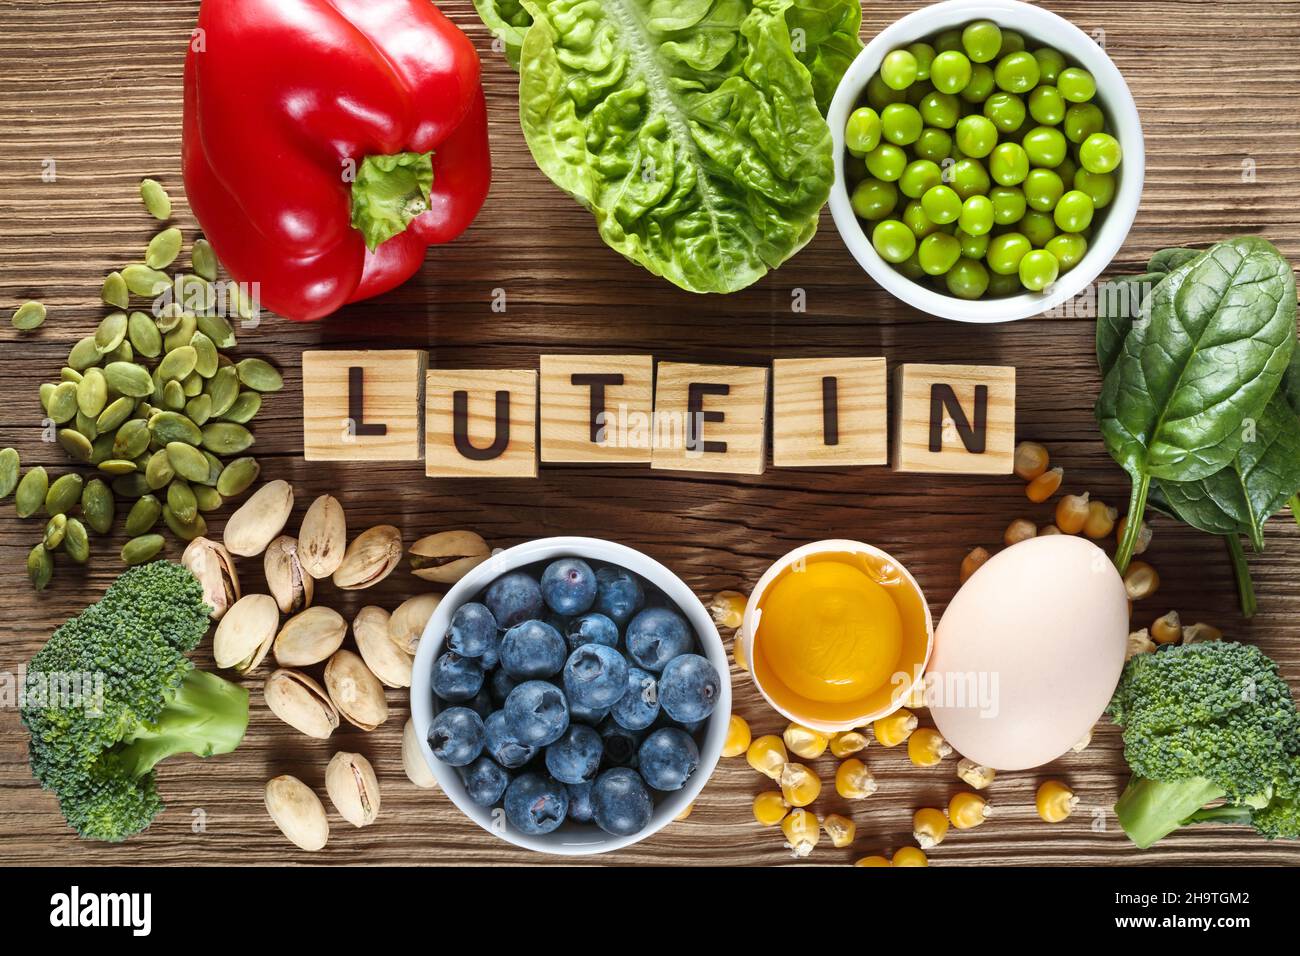 Food sources of lutein and zeaxanthin. Foods as yolk egg, broccoli, pumpkin seeds, pepper, lettuce, green peas, spinach, blueberries, corn and pistach Stock Photo